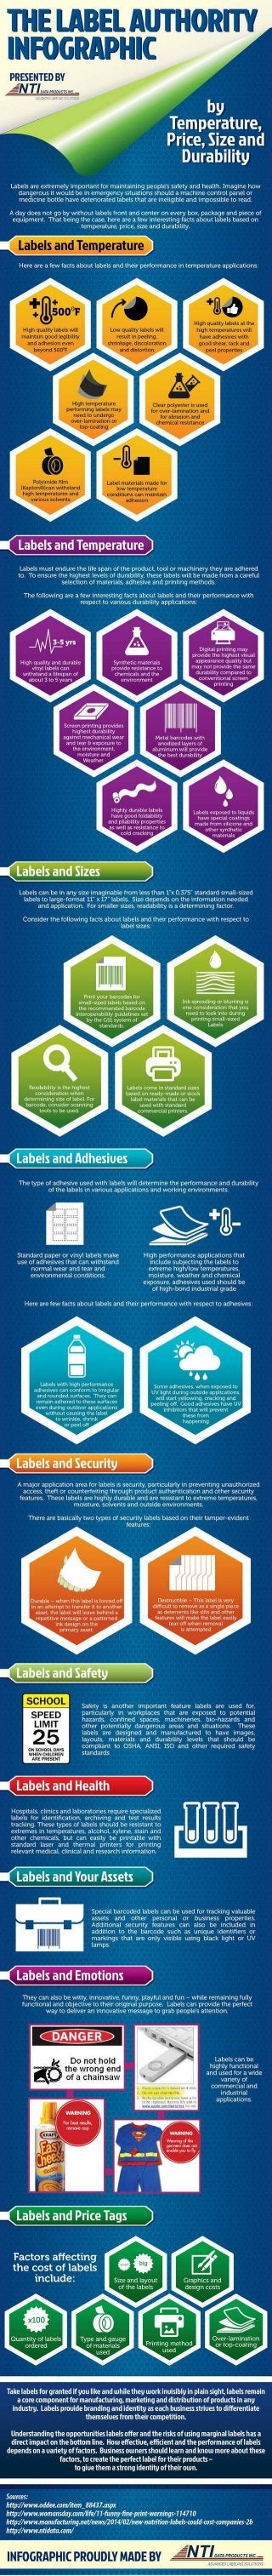 The Label Authority Infographic